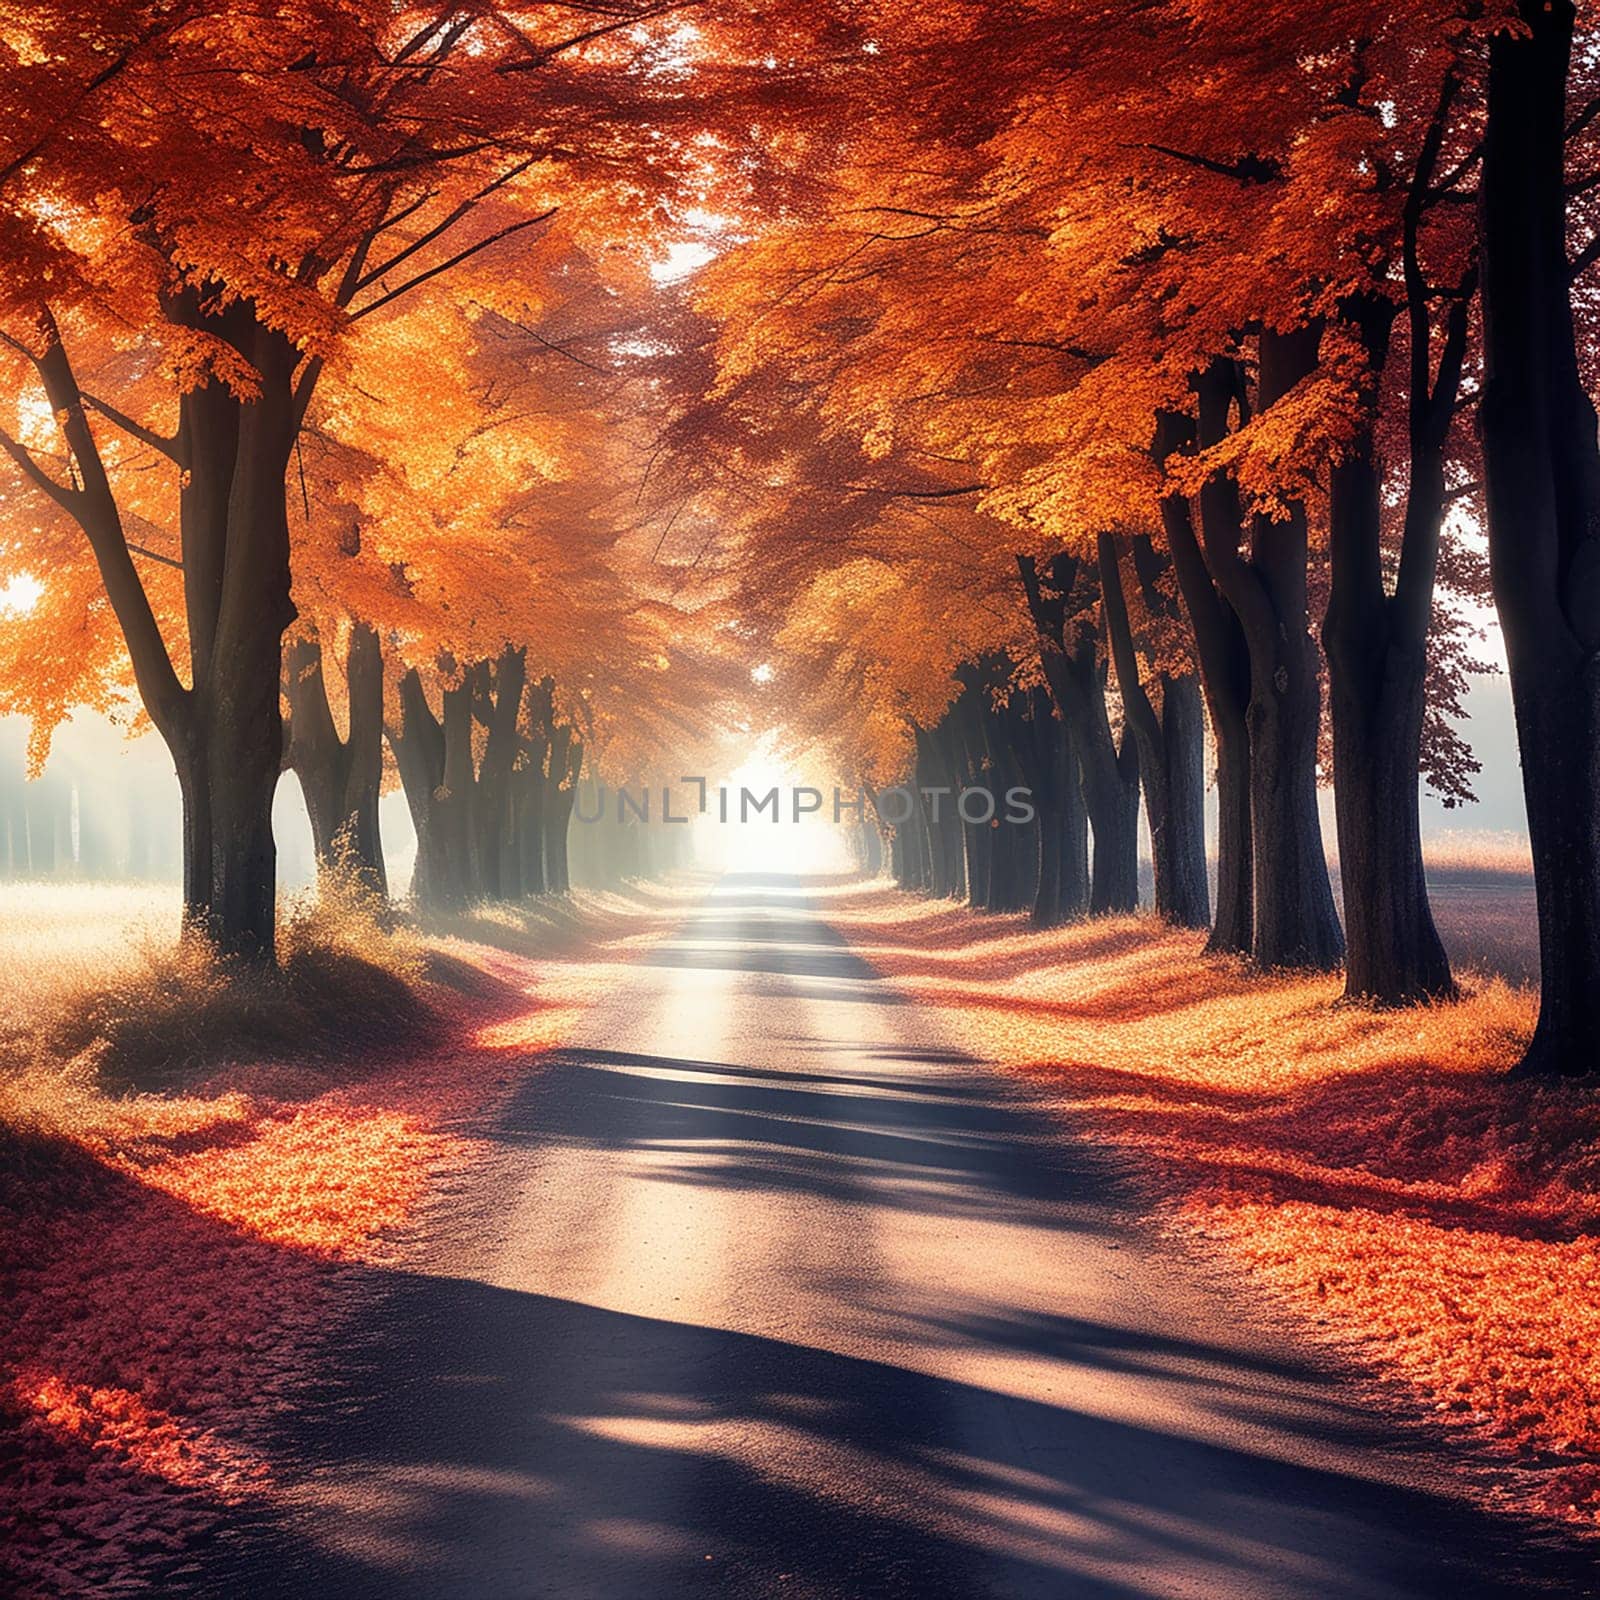 Journey through a Real Trees Tunnel with Beautiful Autumnal Colors